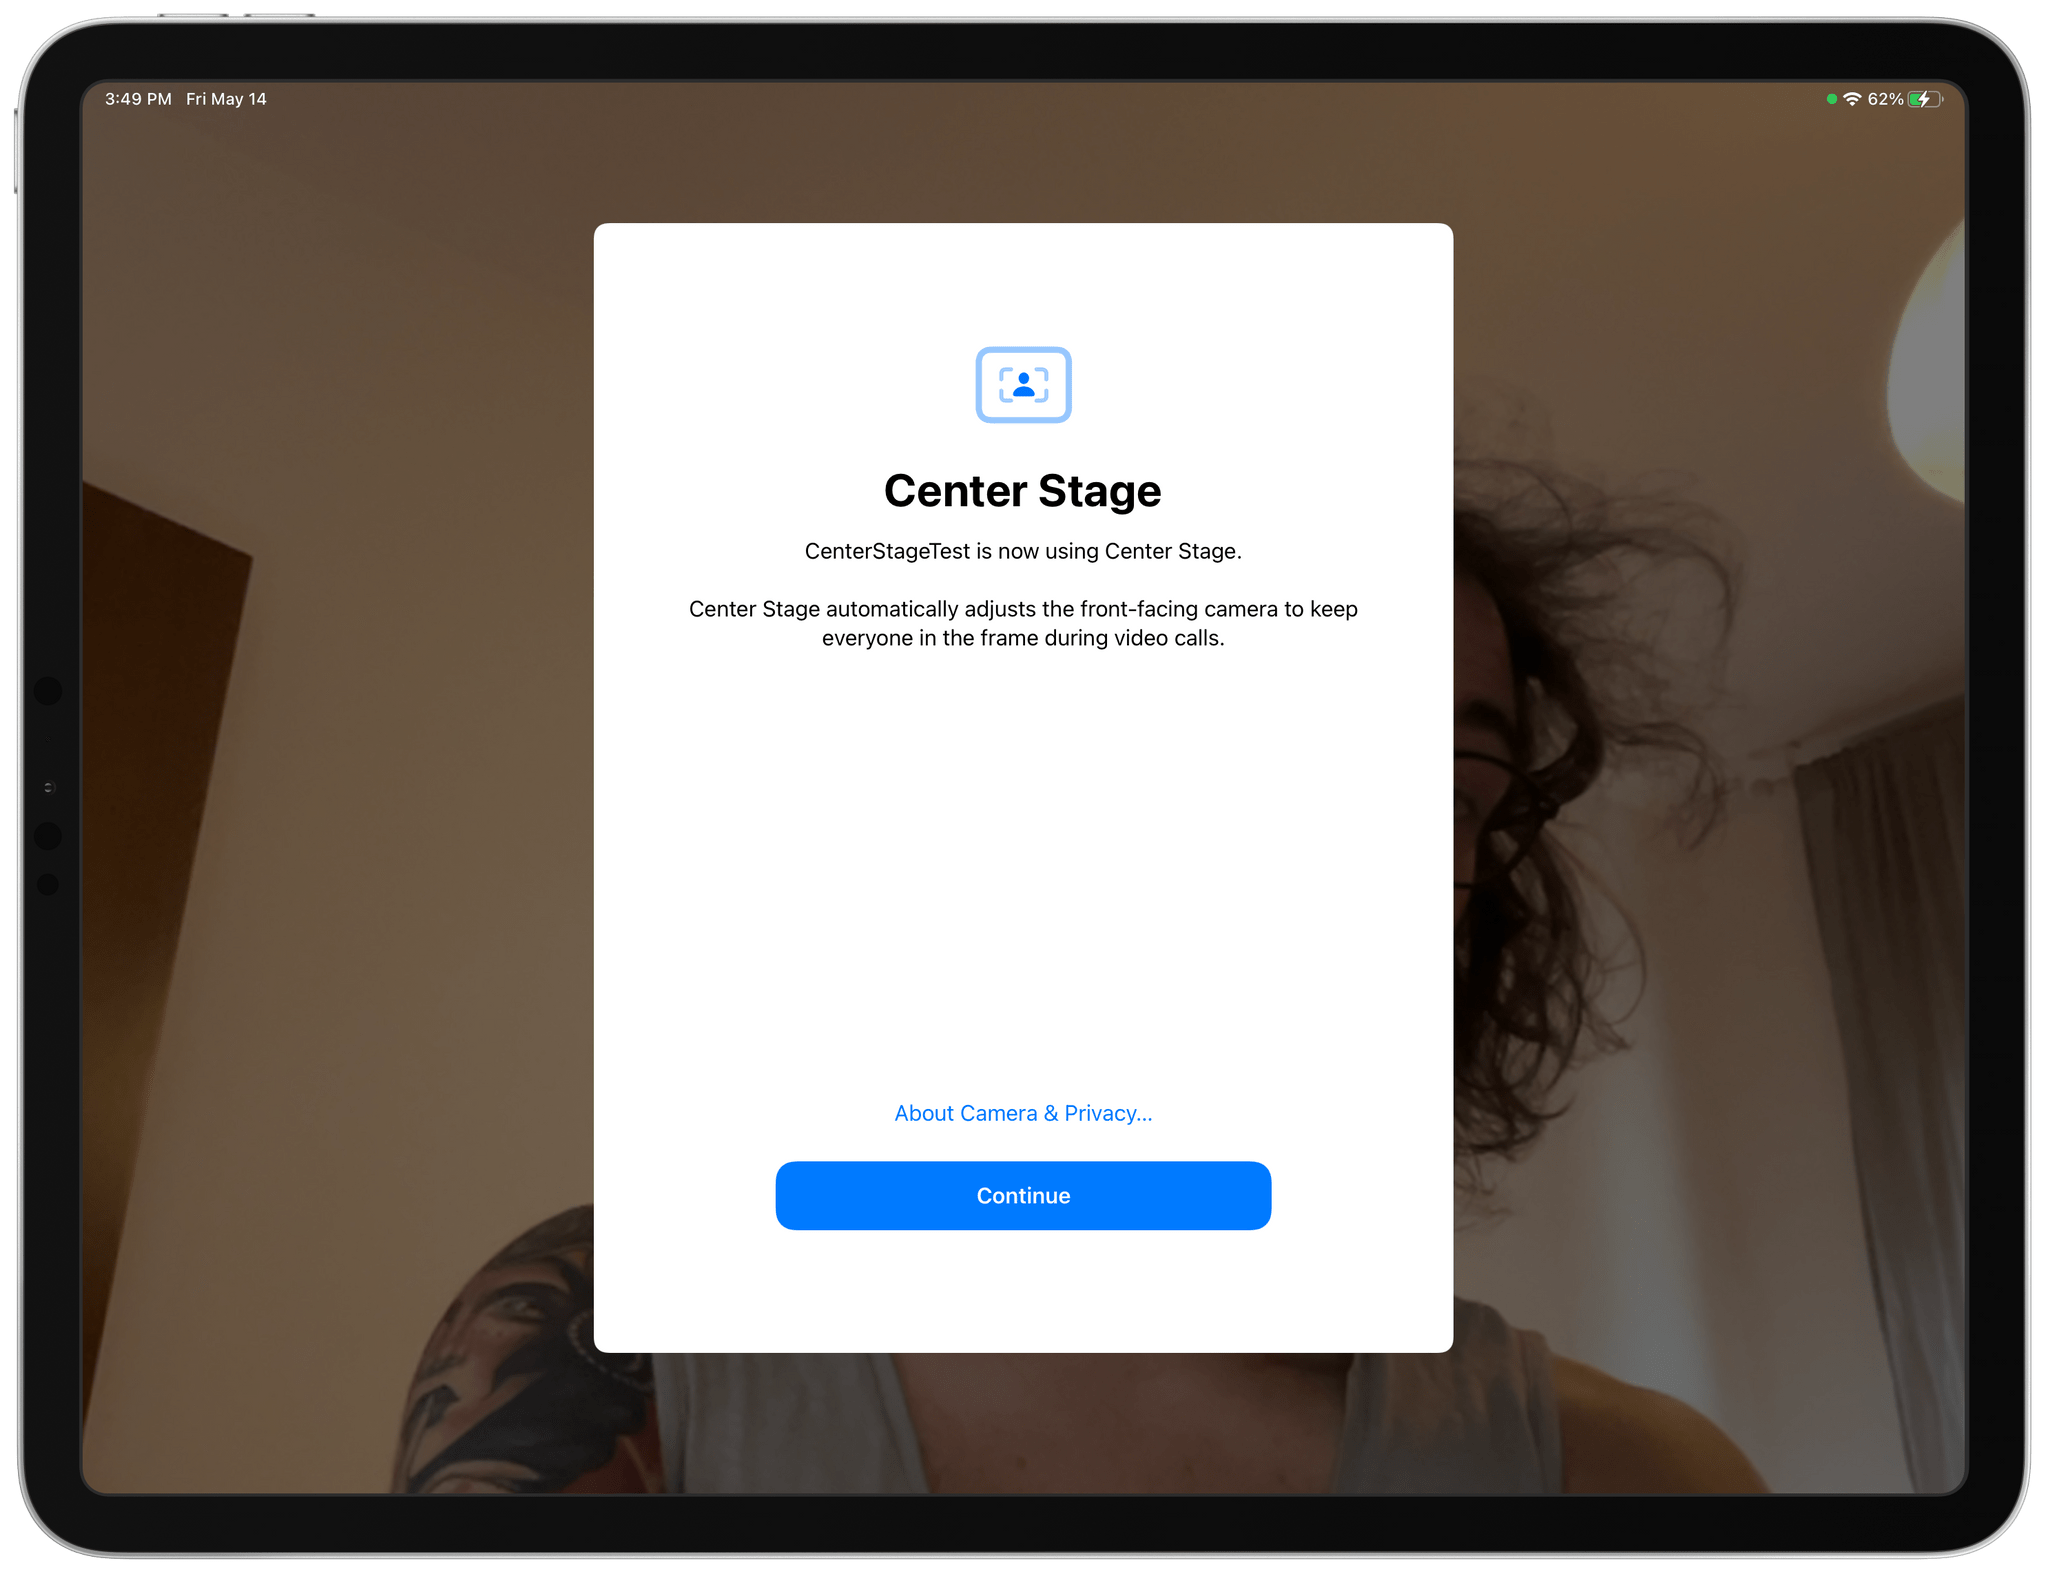 The Center Stage splash screen I saw in our custom test app.